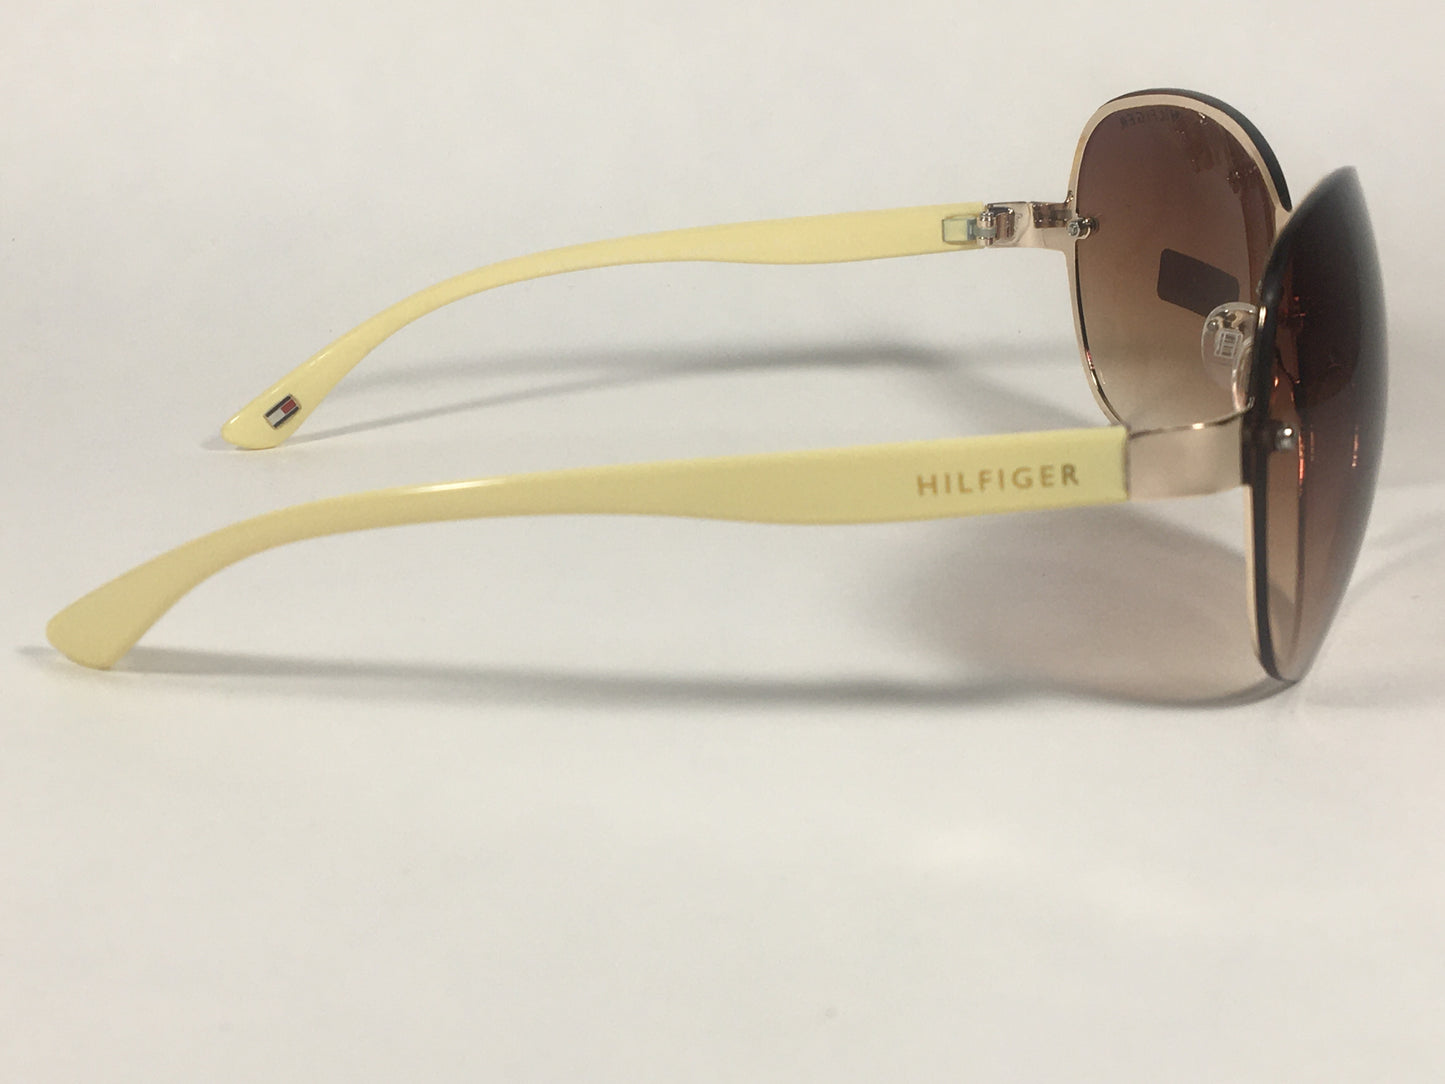 Tommy Hilfiger Melone Rimless Butterfly Sunglasses Gold Cream Frame Brown Gradient Lens MELONE WM OL78 - Sunglasses